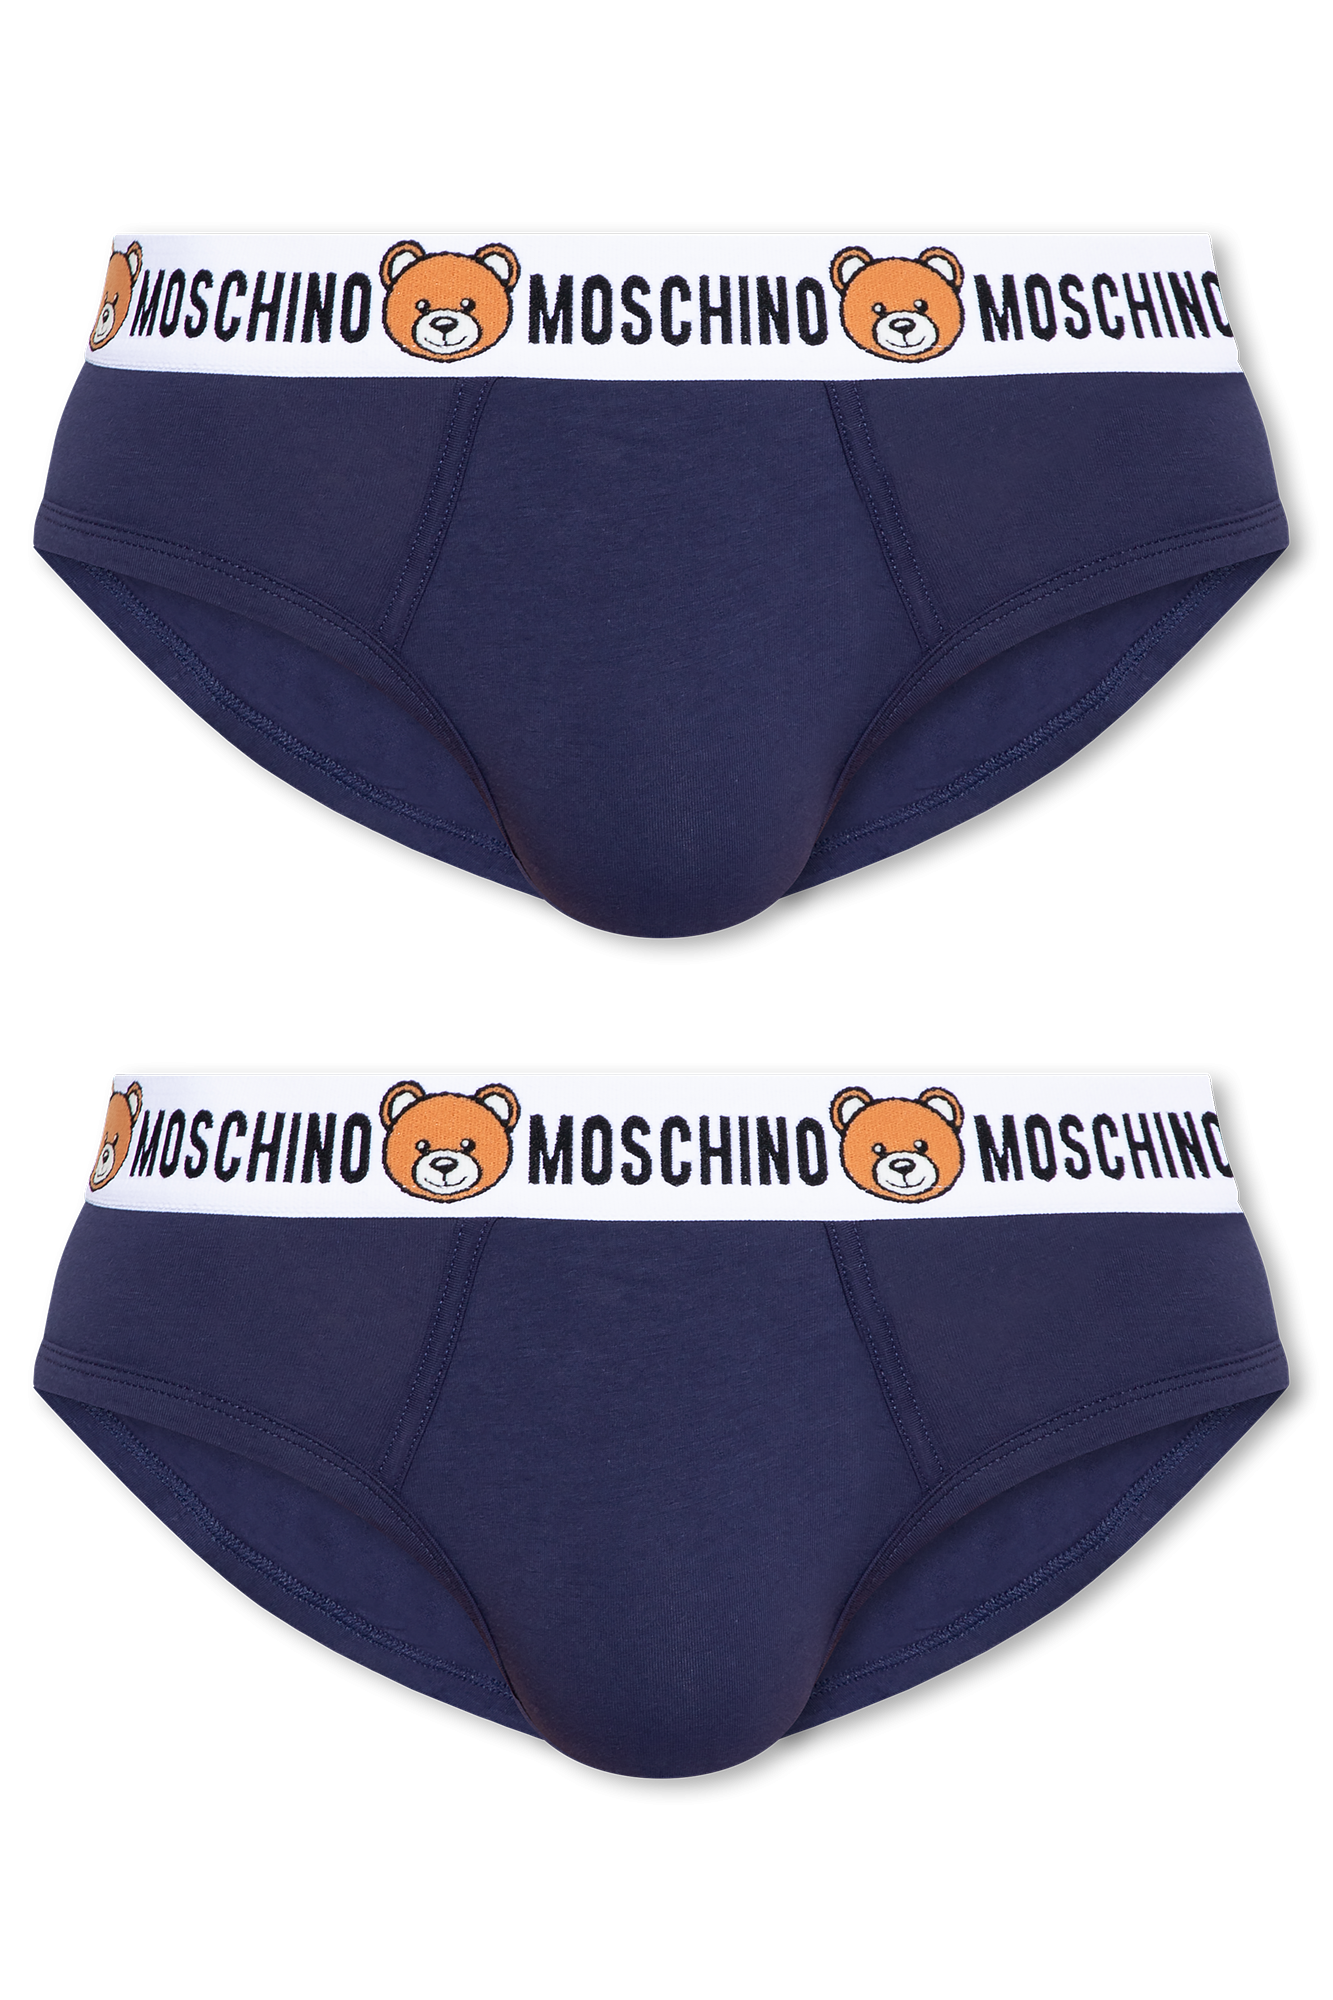 Moschino Briefs two-pack, Men's Clothing